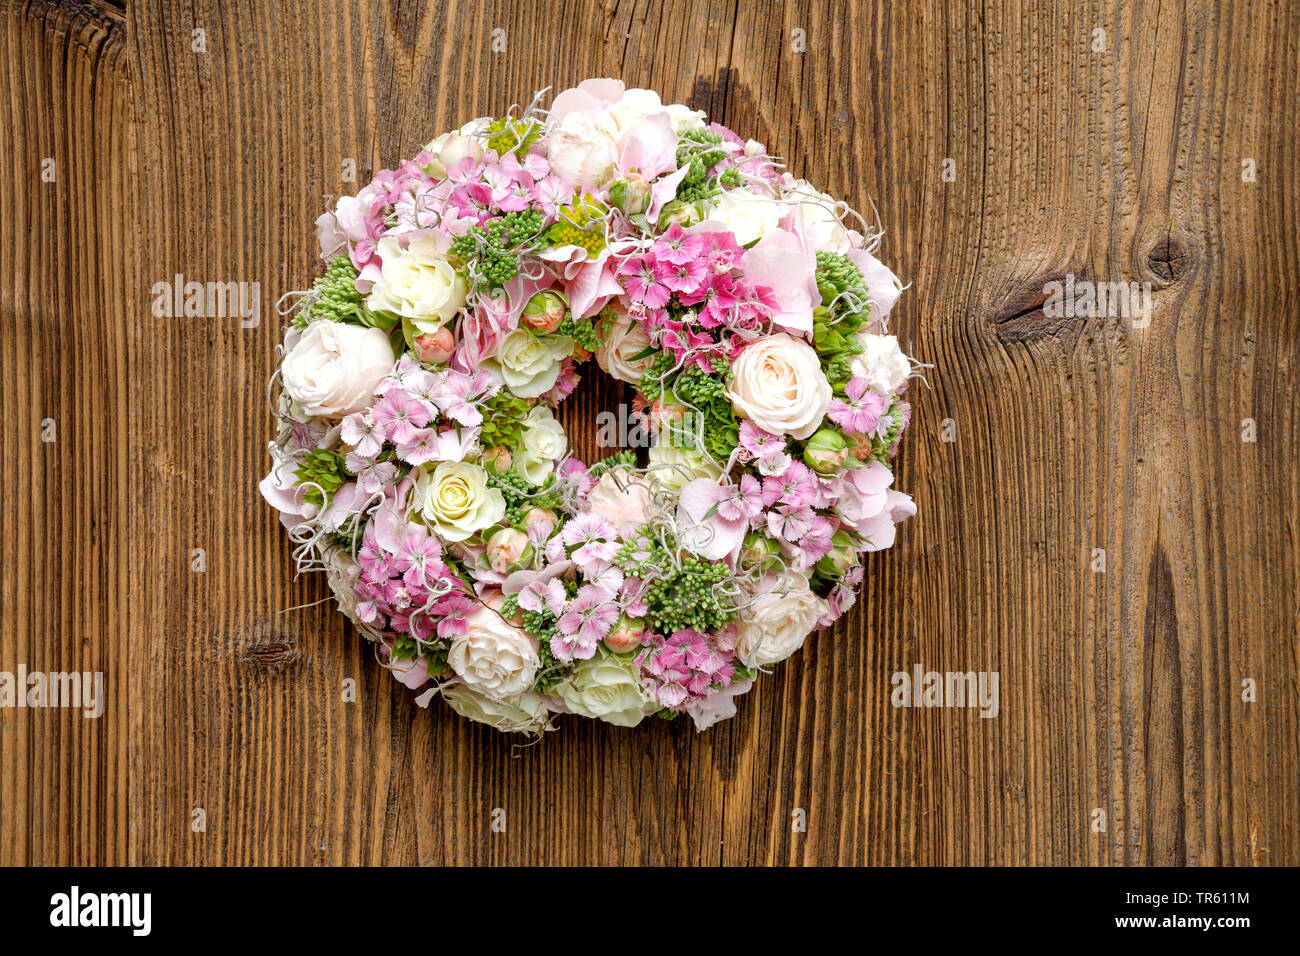 flowers girdle with roses and pinks Stock Photo